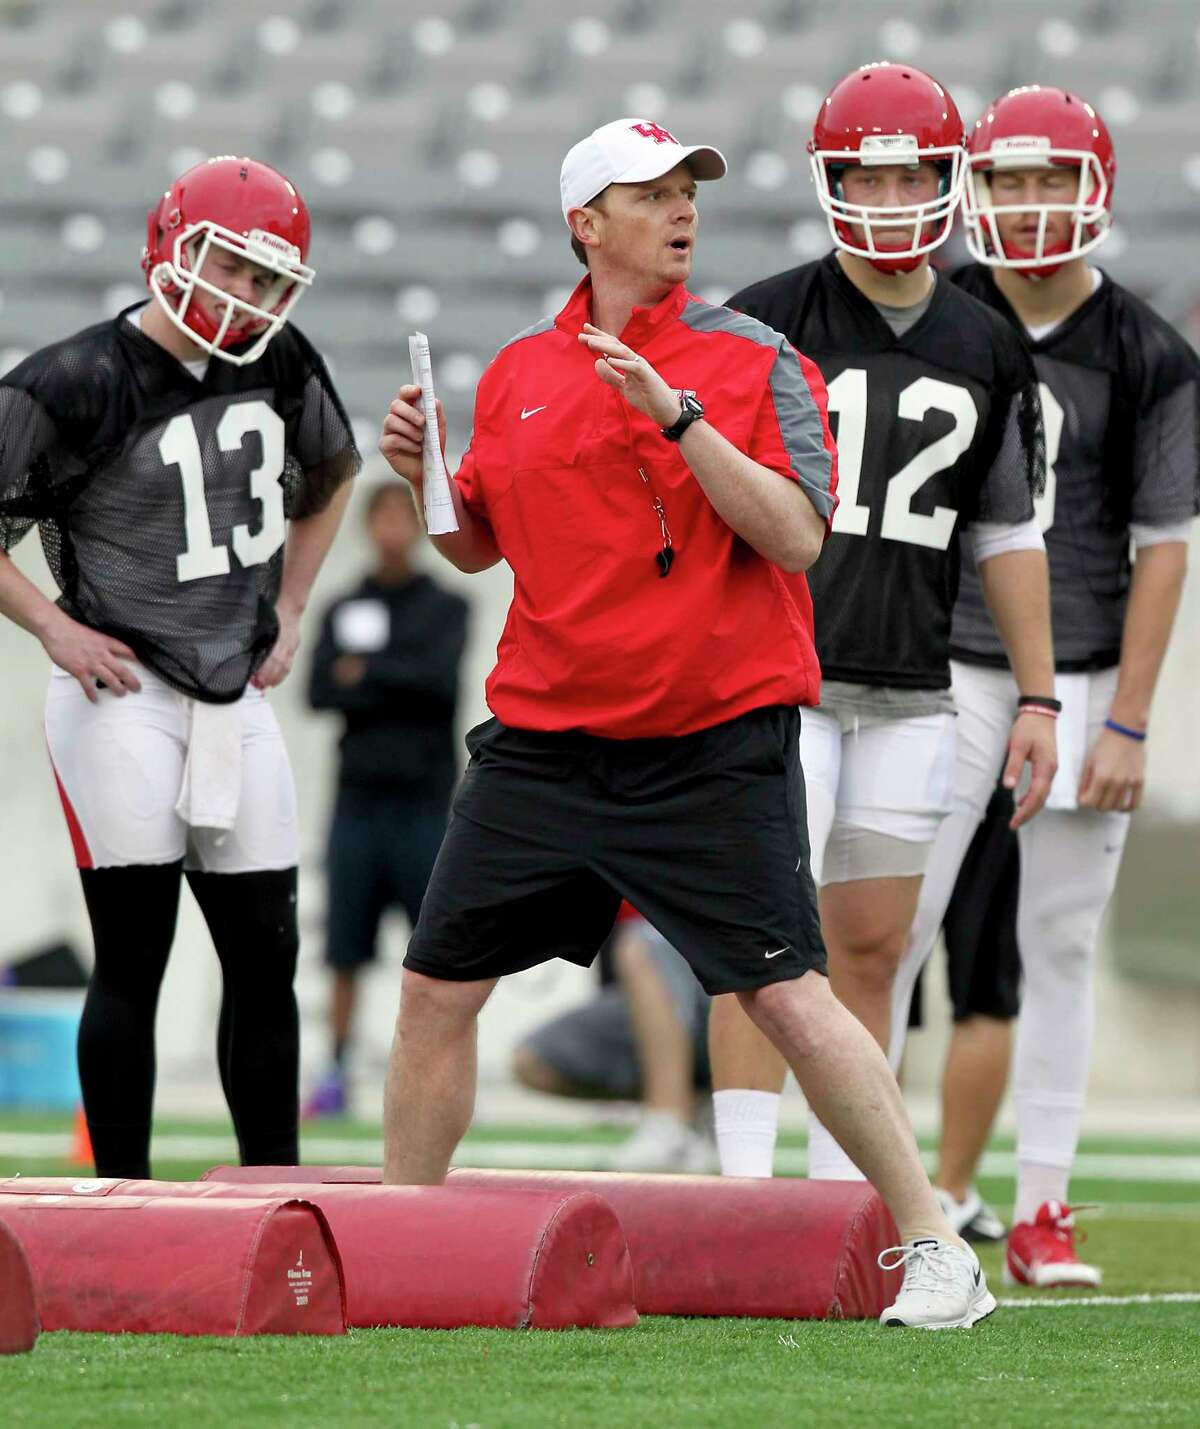 New coach Major Applewhite inherits a program coming off a 9-4 season and its fourth straight bowl.